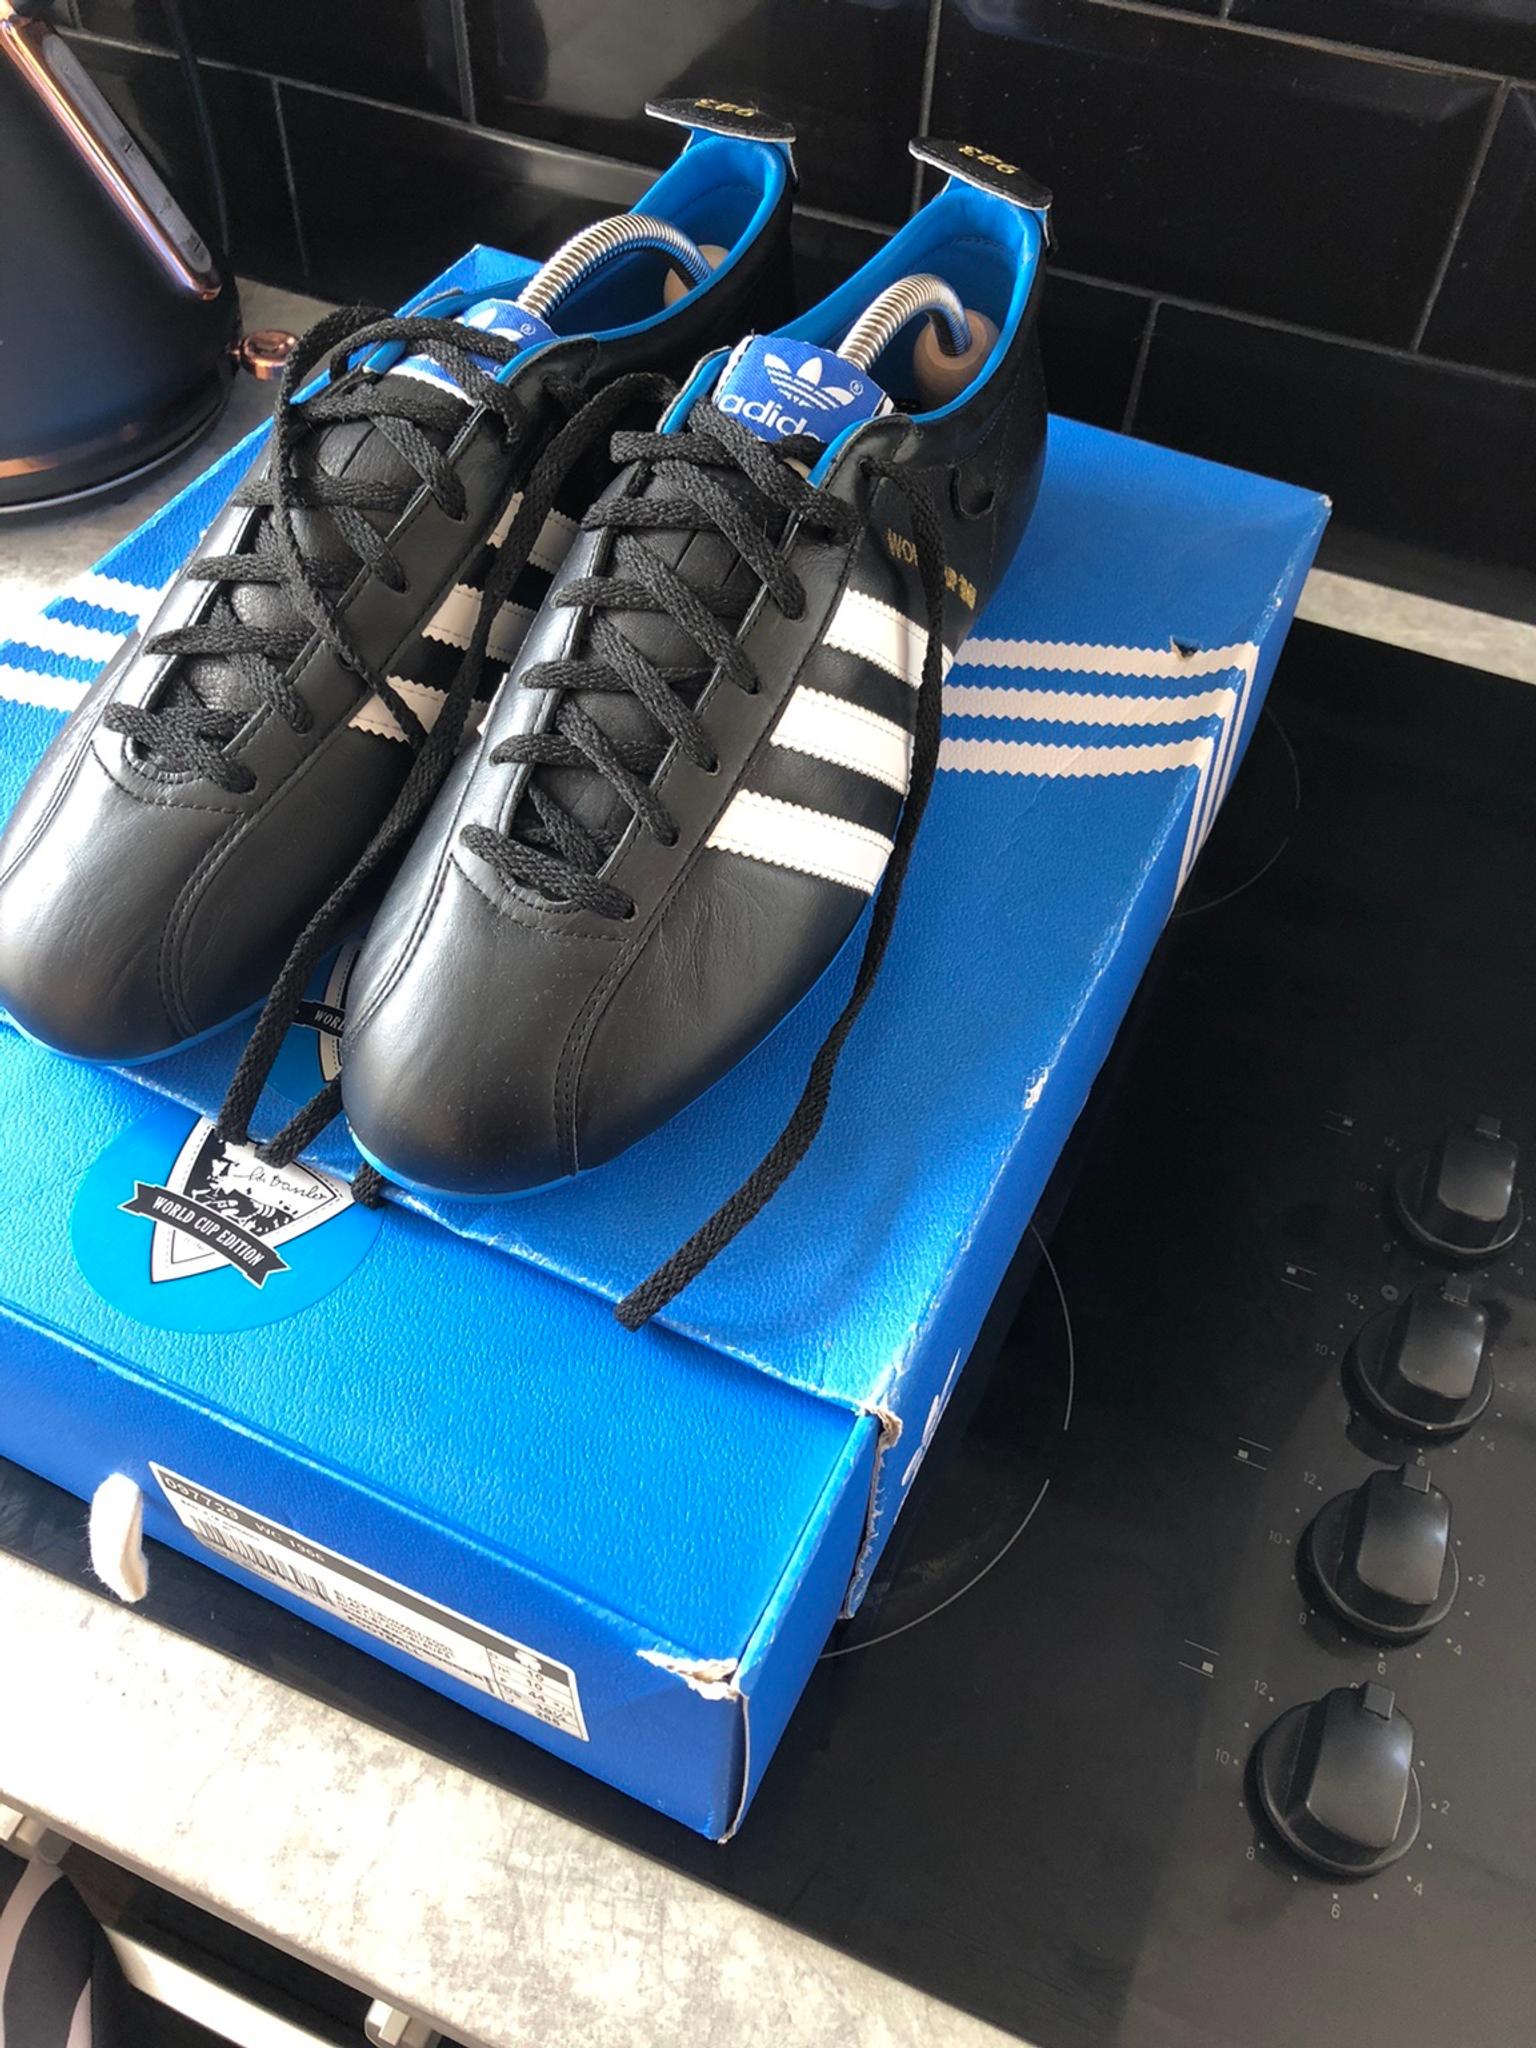 adidas world cup limited edition